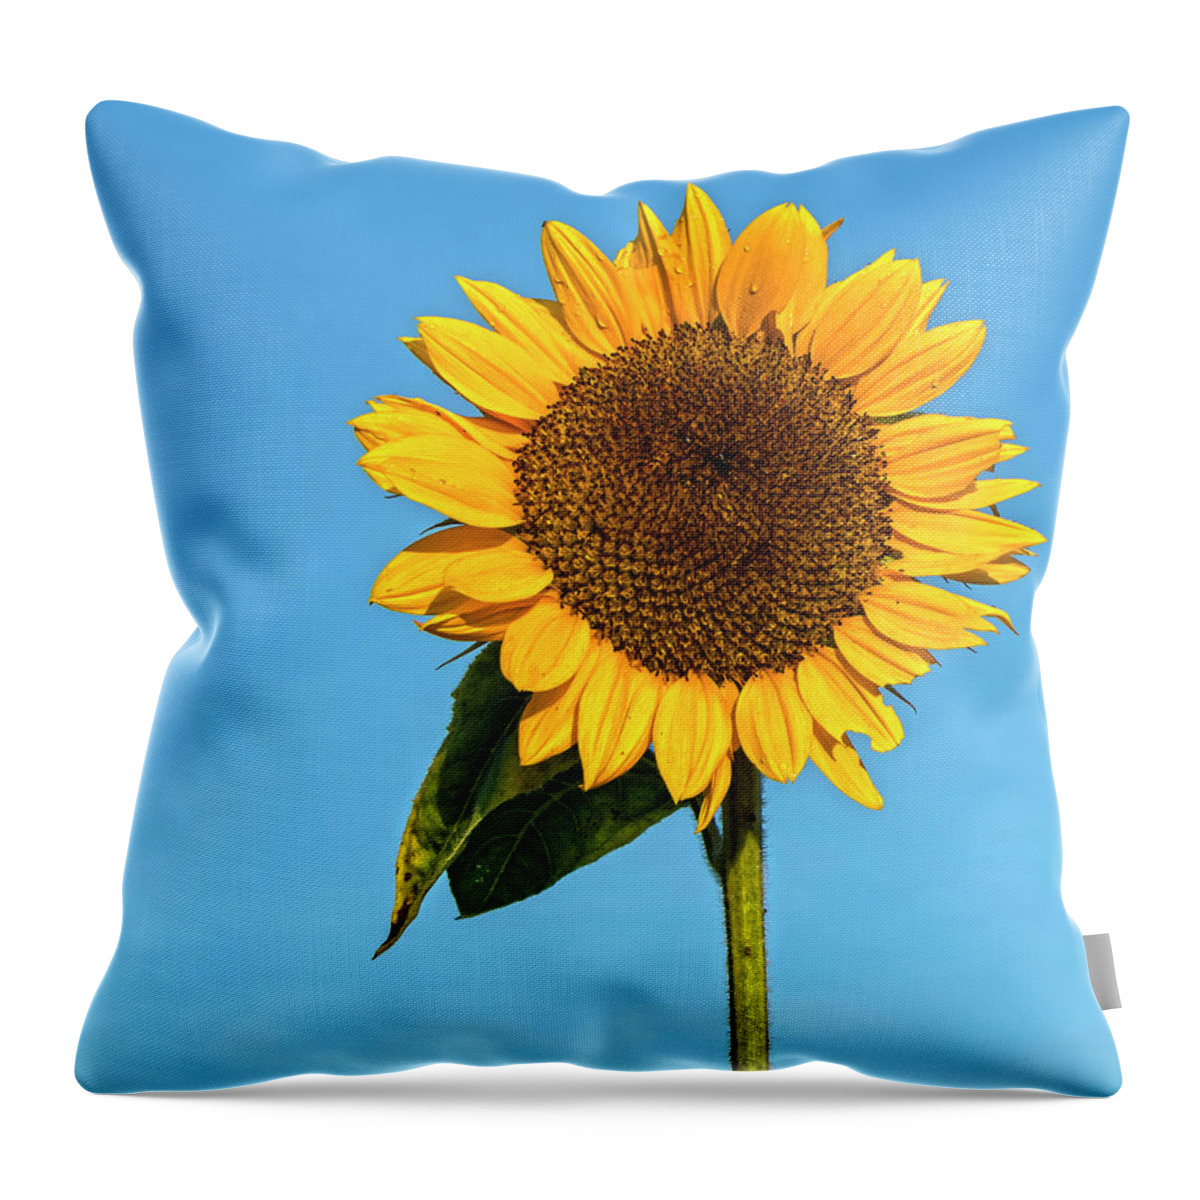 Sunflowers Throw Pillow featuring the photograph Flower For A Lady by Angelo Marcialis